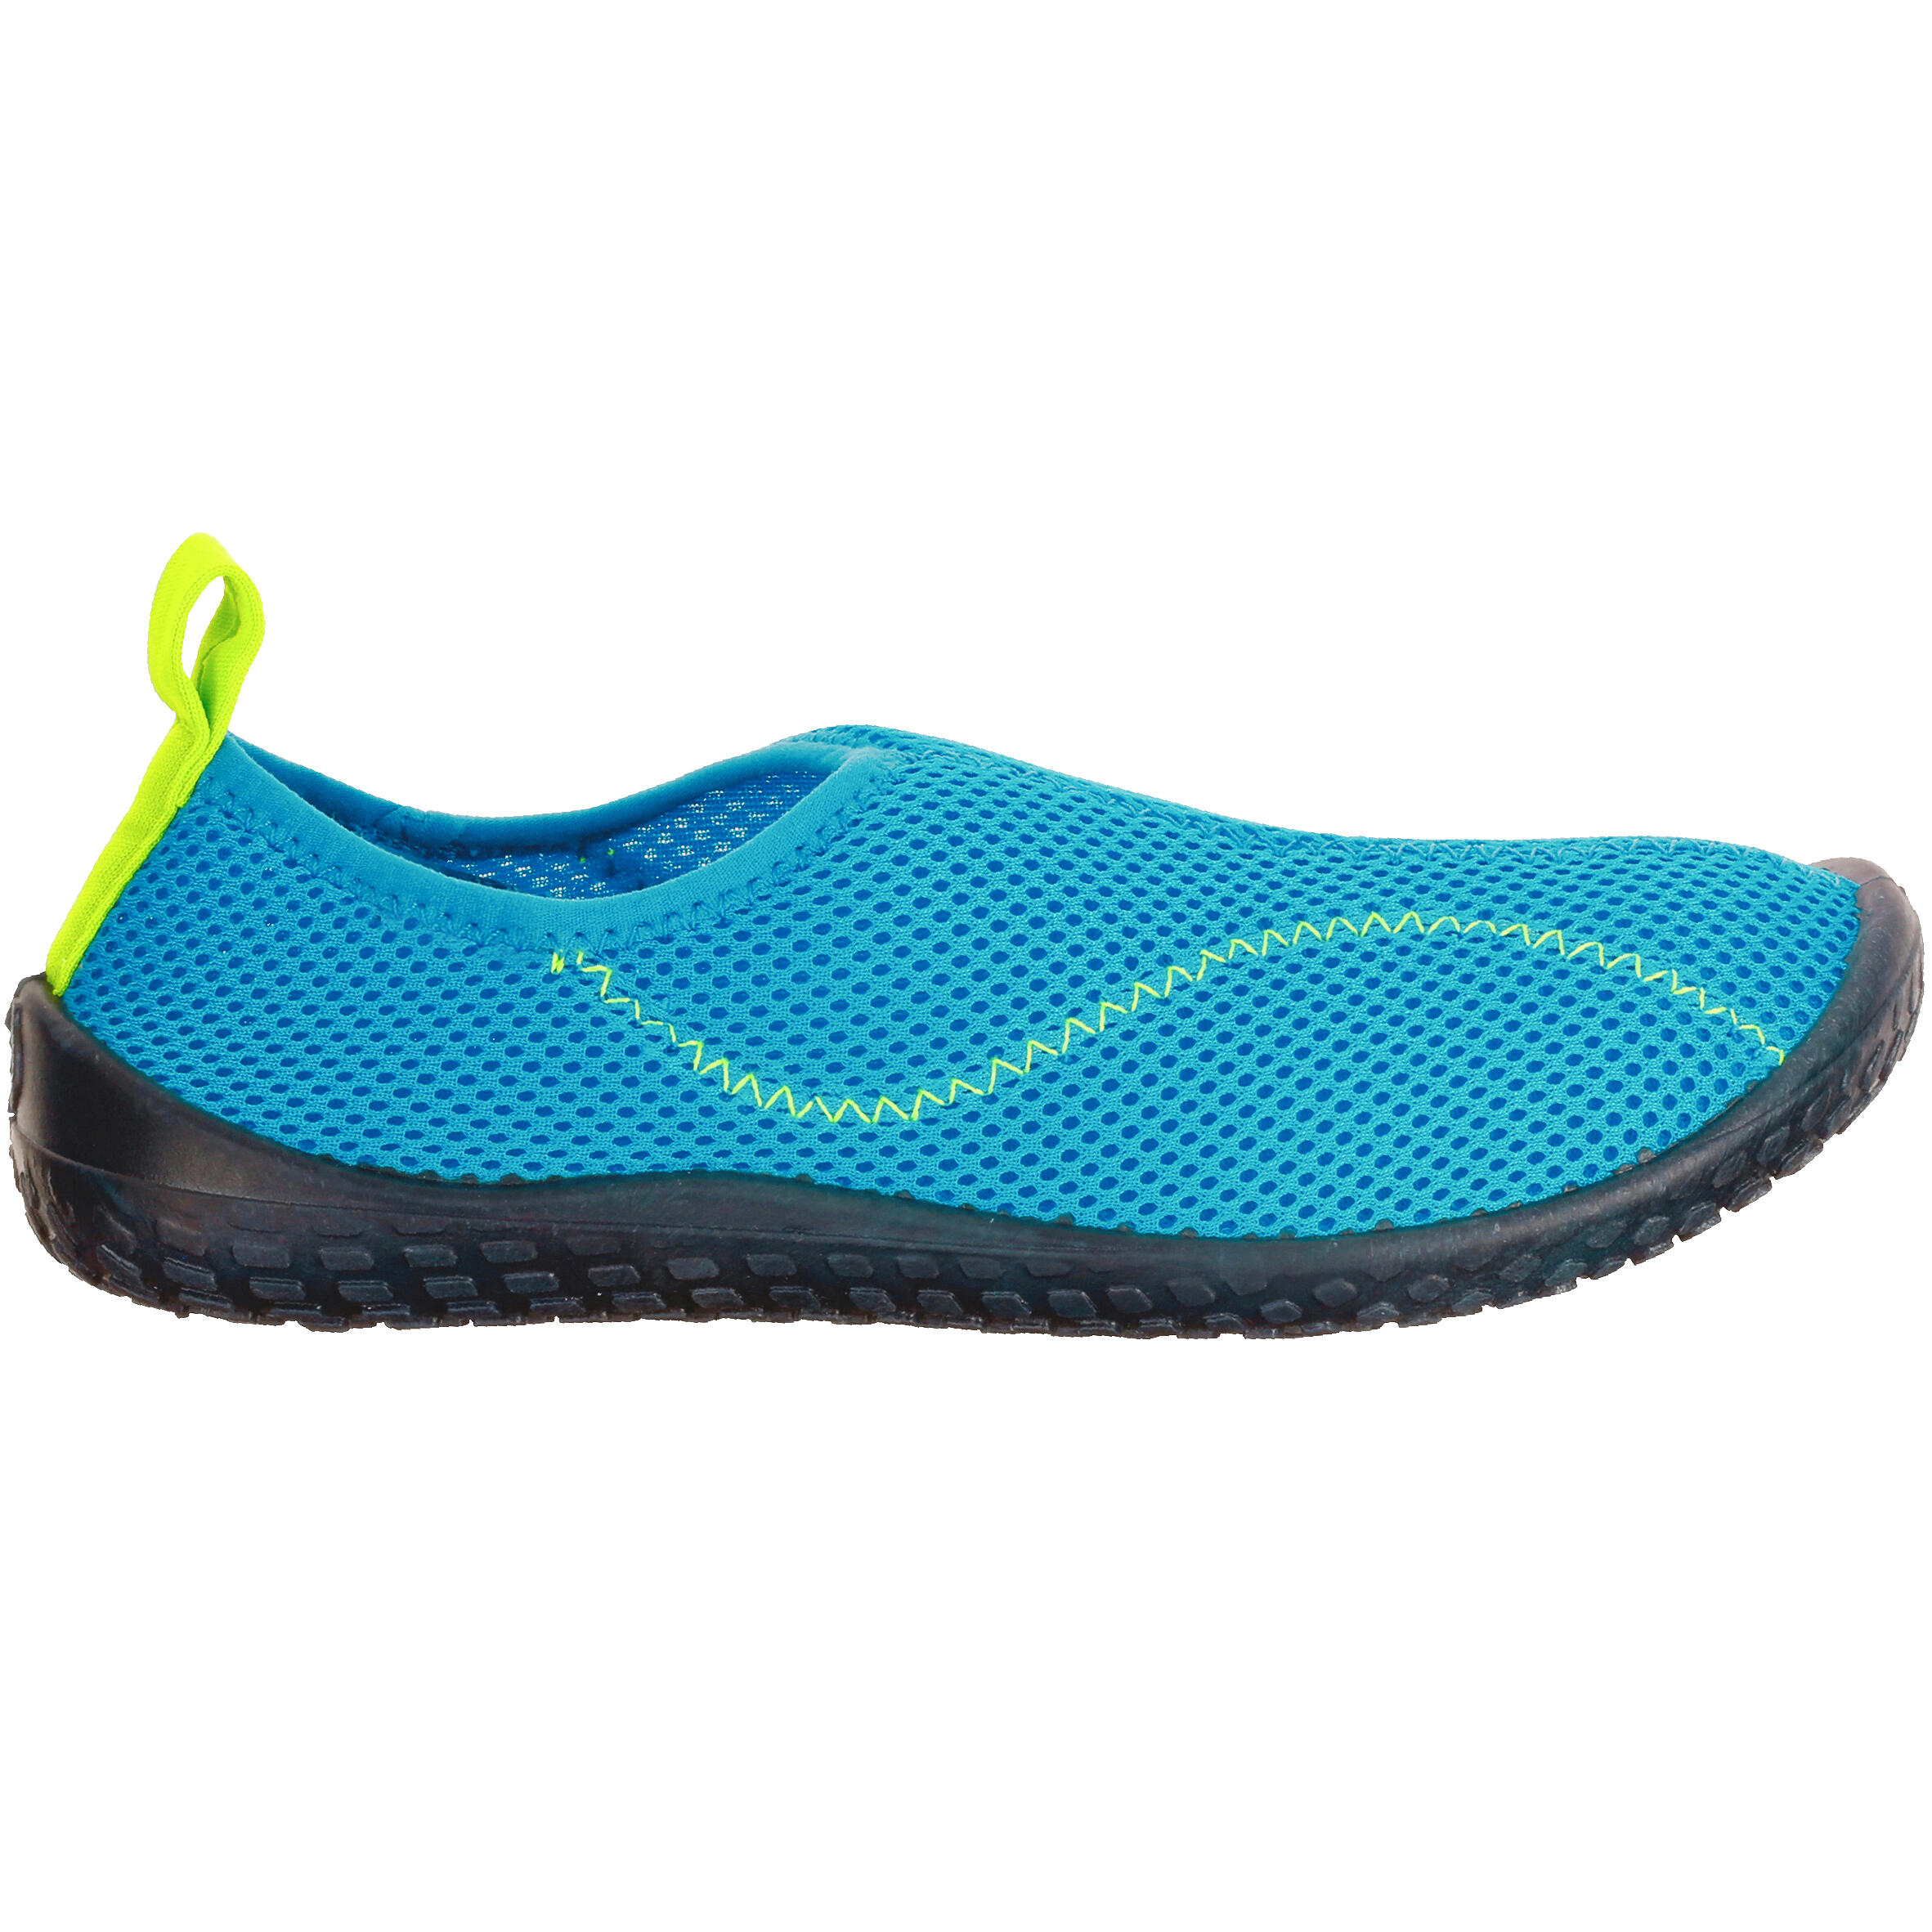 Beach Shoes For Sale|Buy Water Shoes 